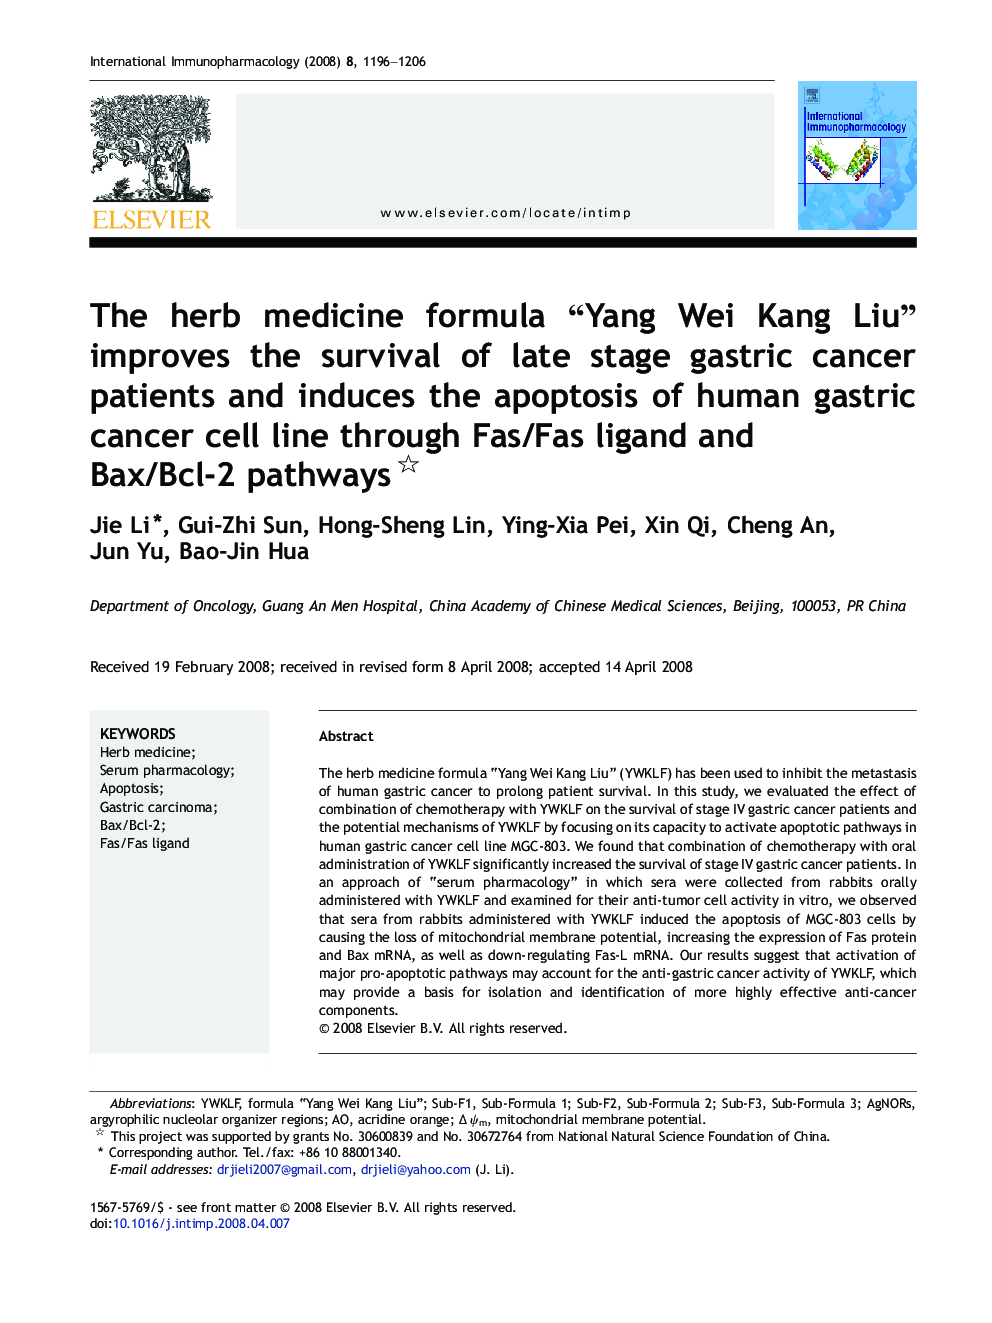 The herb medicine formula “Yang Wei Kang Liu” improves the survival of late stage gastric cancer patients and induces the apoptosis of human gastric cancer cell line through Fas/Fas ligand and Bax/Bcl-2 pathways 